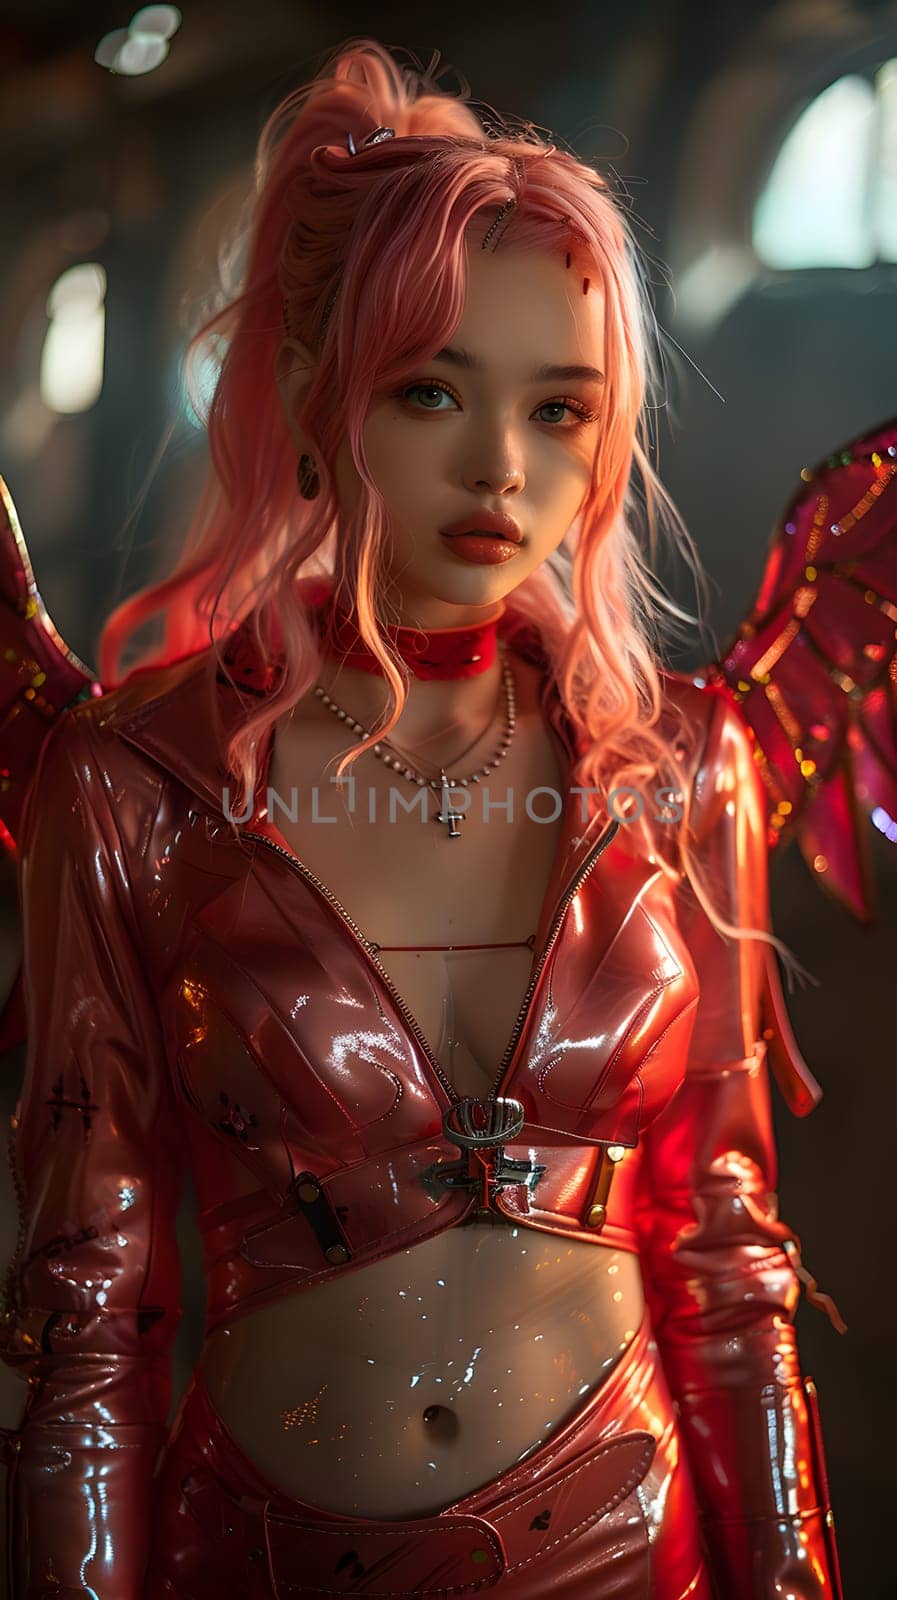 A fictional character with pink hair is dressed in a red costume featuring wings. She is ready to perform at an entertainment event, standing tall with confidence in the darkness